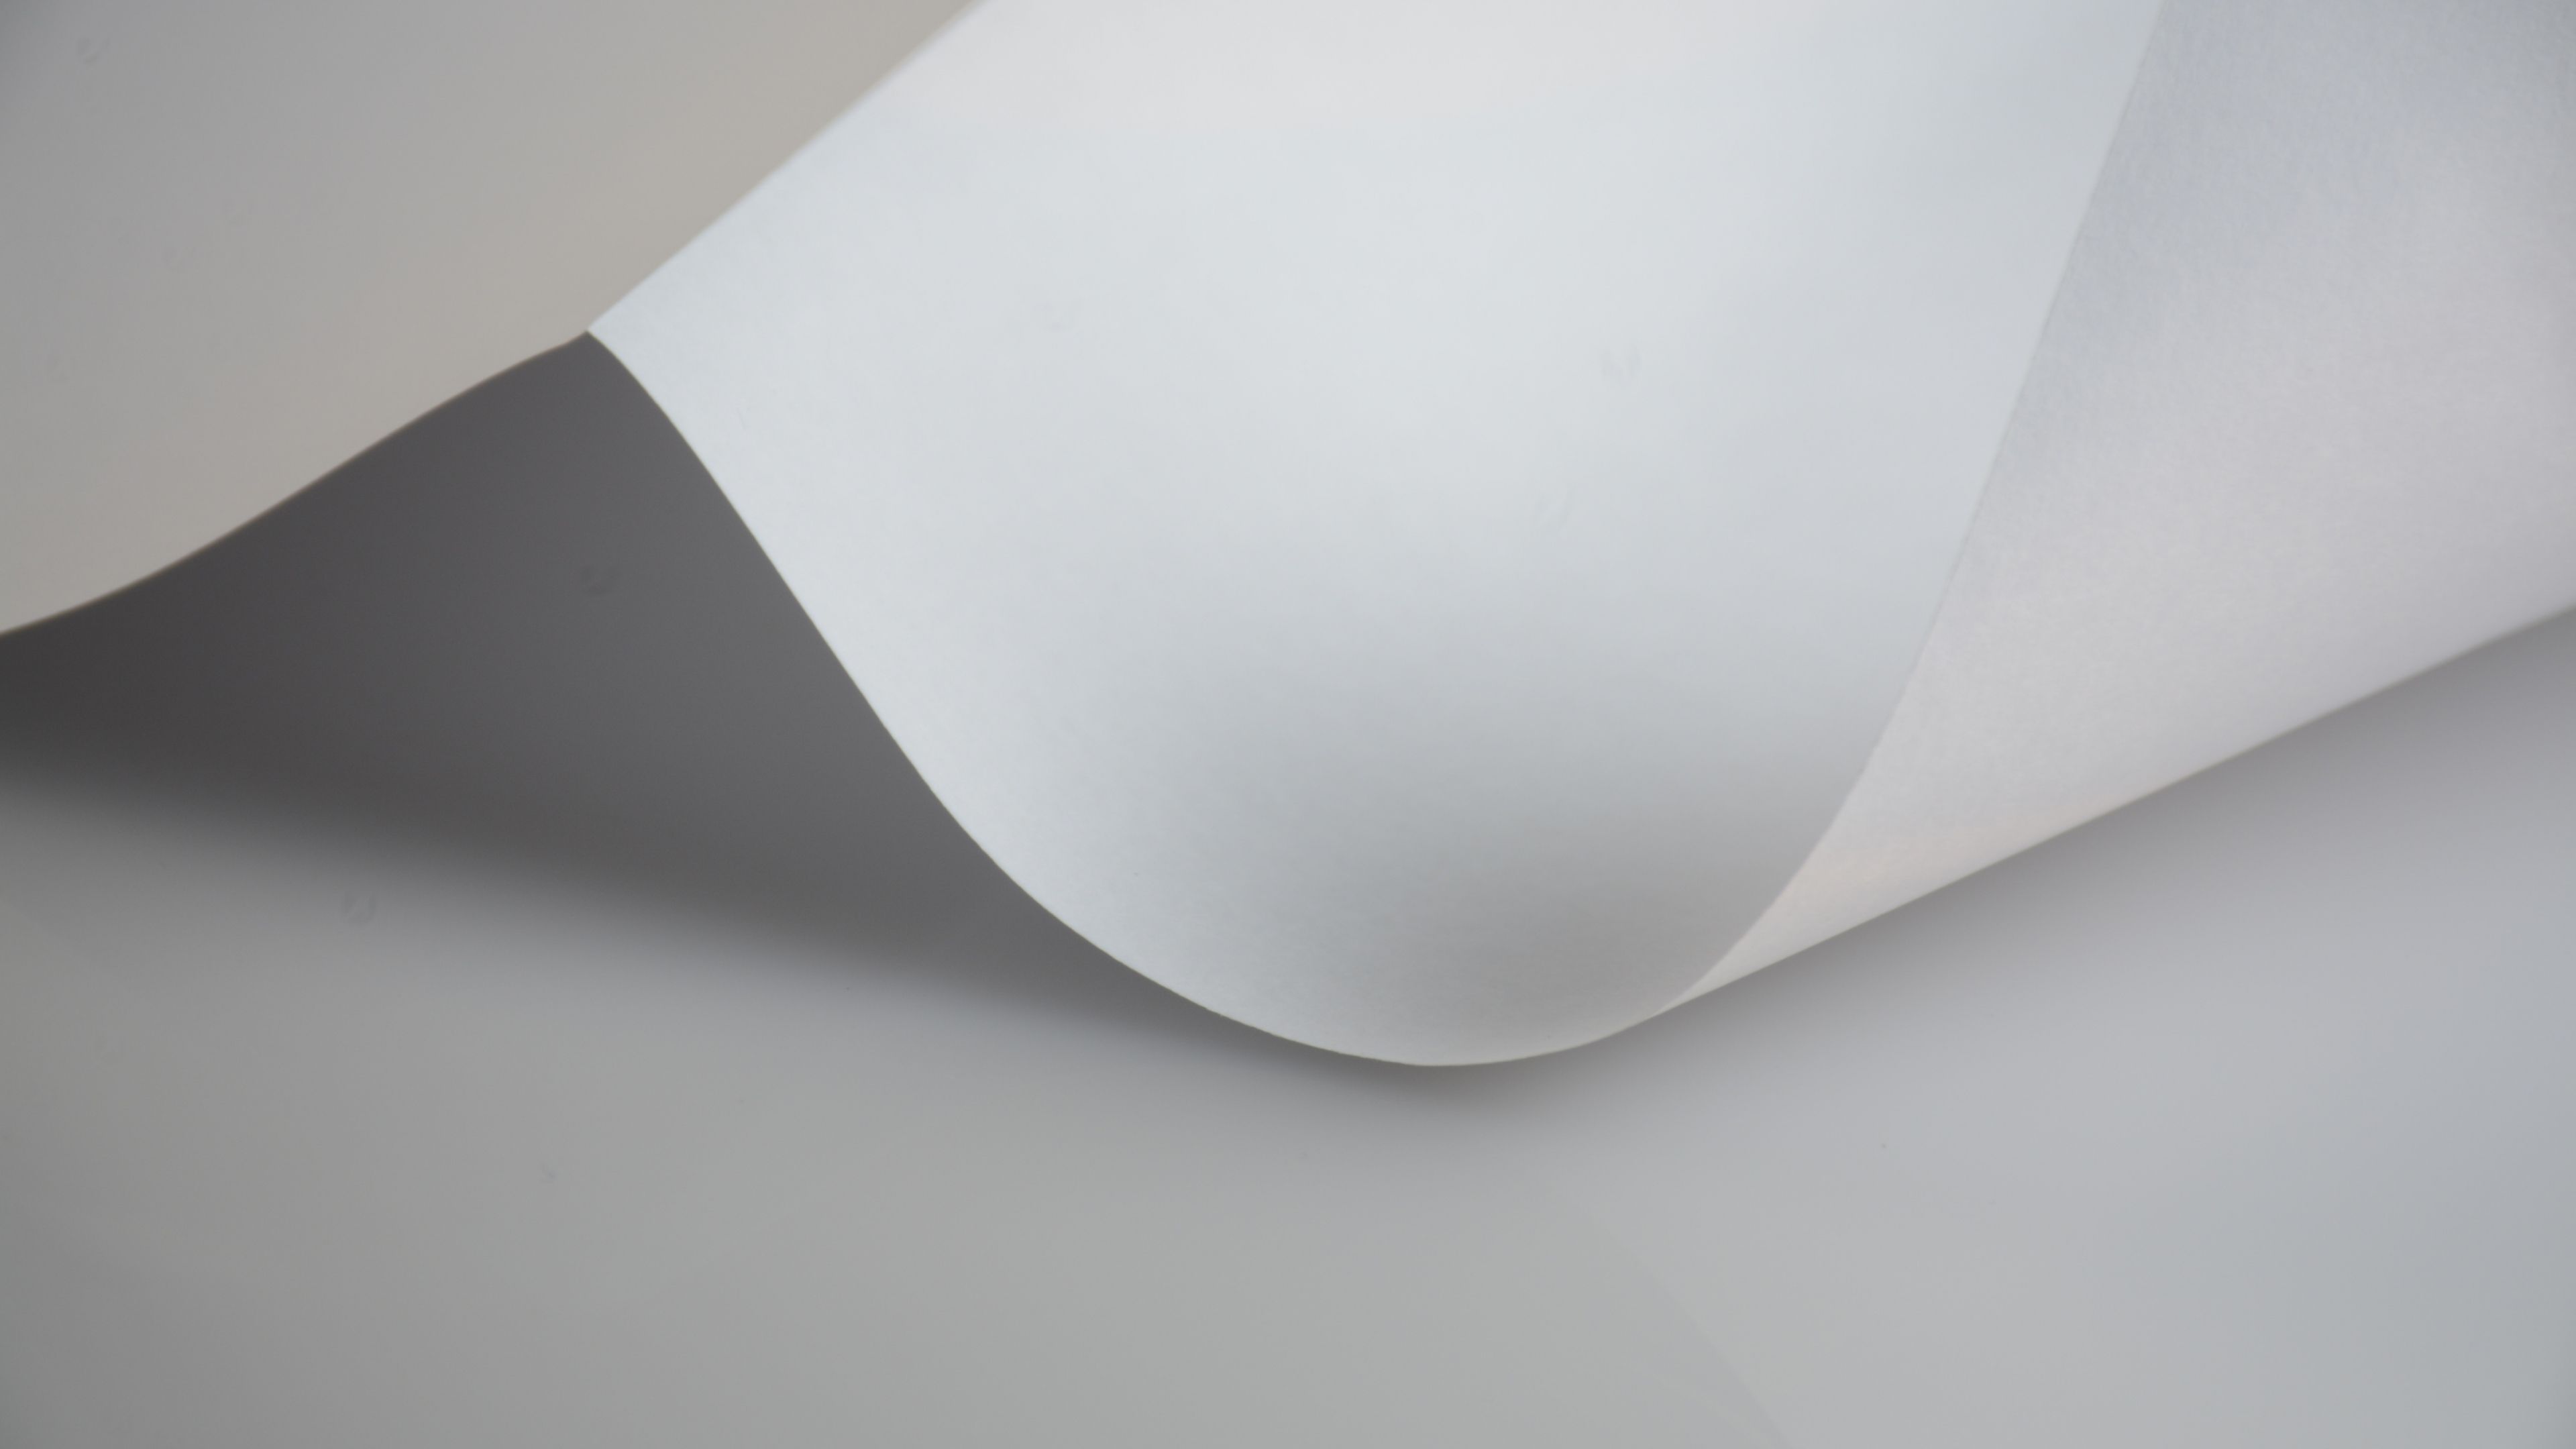 Download 3840x2160 wallpaper white paper, simple, minimal, 4k, uhd 16: widescreen, 3840x2160 HD image, background, 610